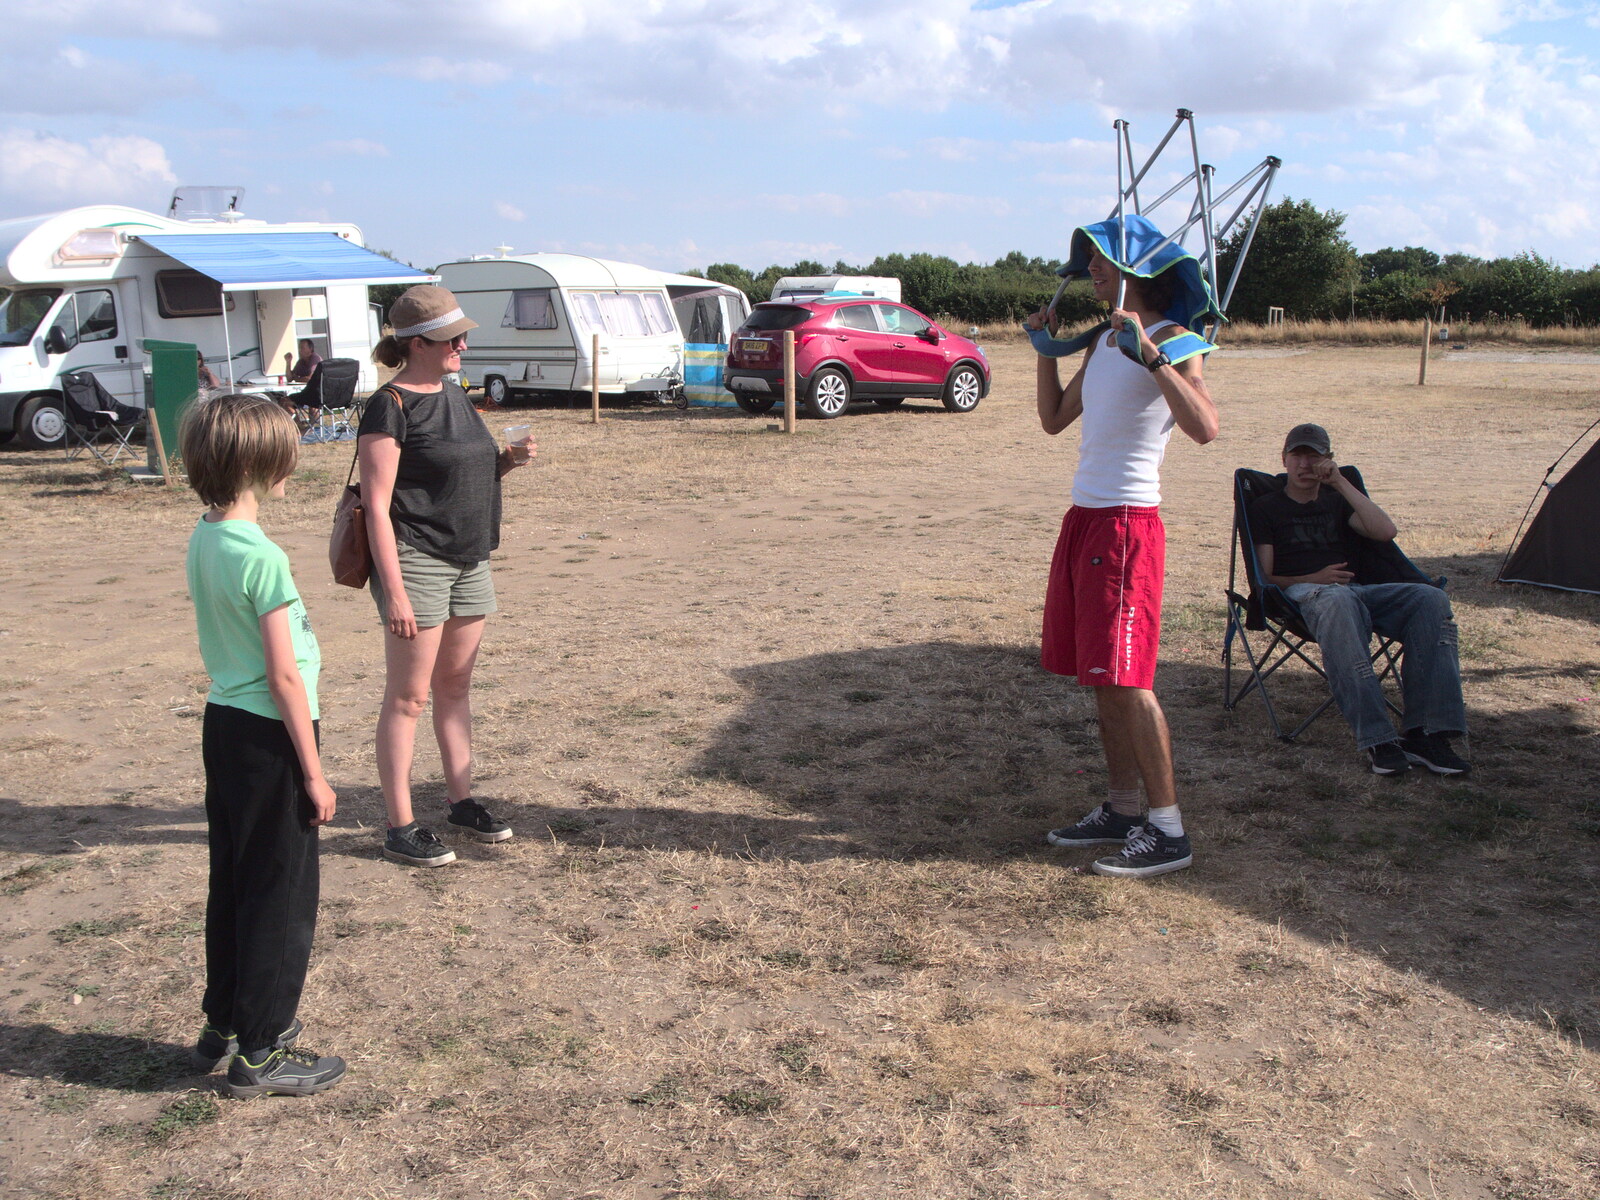 Nathan's got a camping chair on his head from A Trip to Old Buckenham Airfield, Norfolk - 6th August 2022